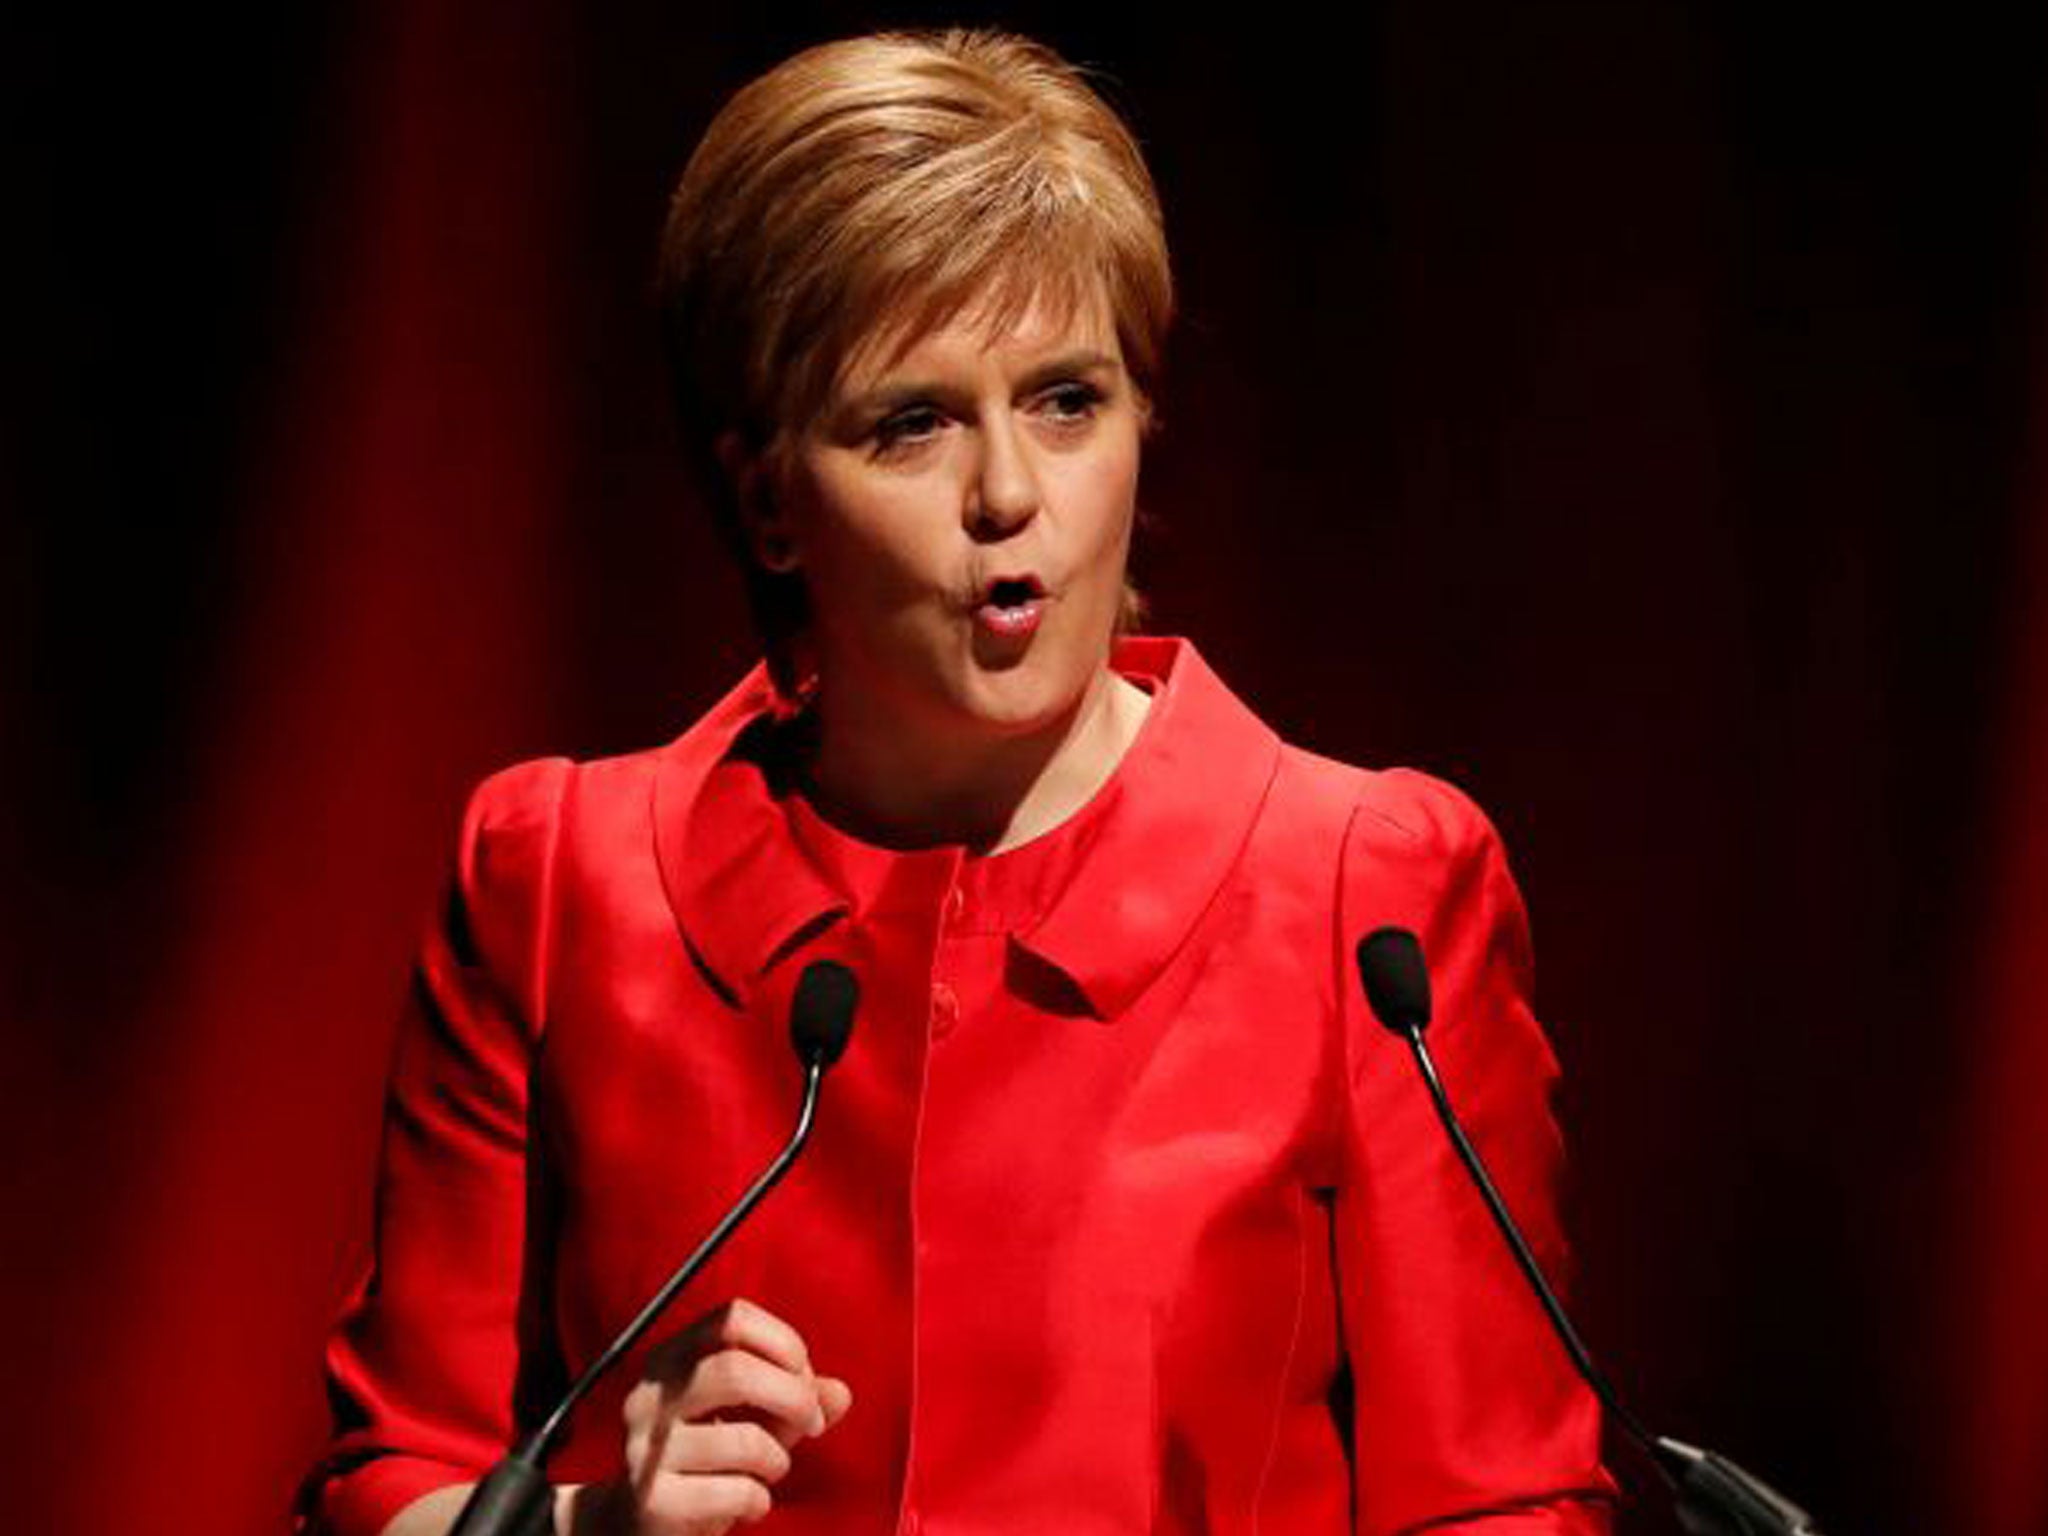 Scotland's First minister Nicola Sturgeon attends the STUC conference in Aviemore